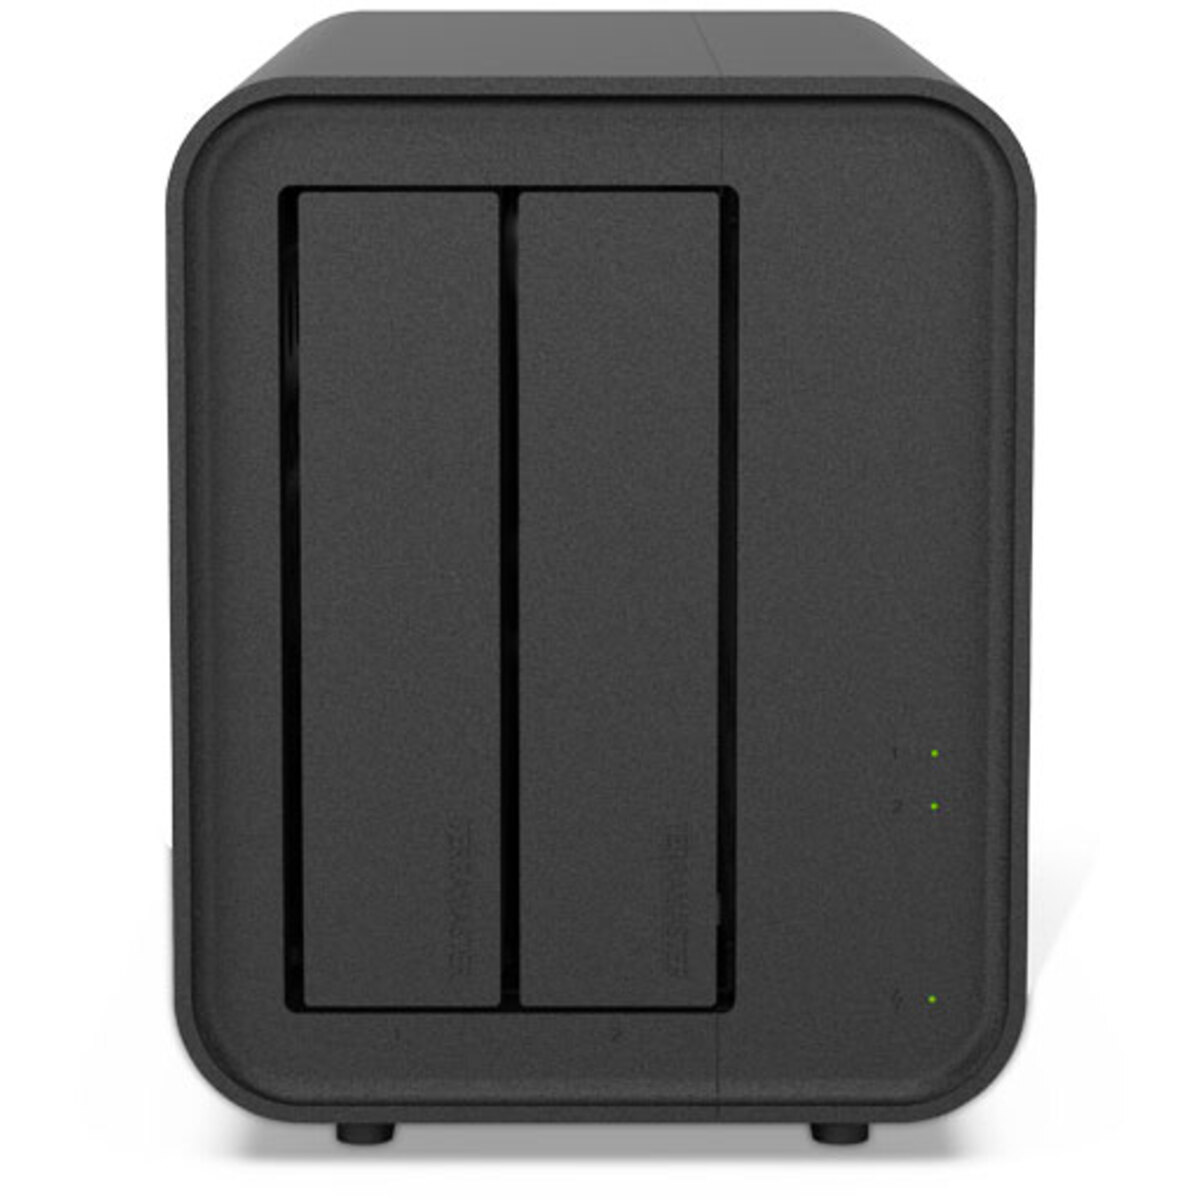 TerraMaster F2-424 Desktop 2-Bay Multimedia / Power User / Business NAS - Network Attached Storage Device Burn-In Tested Configurations F2-424